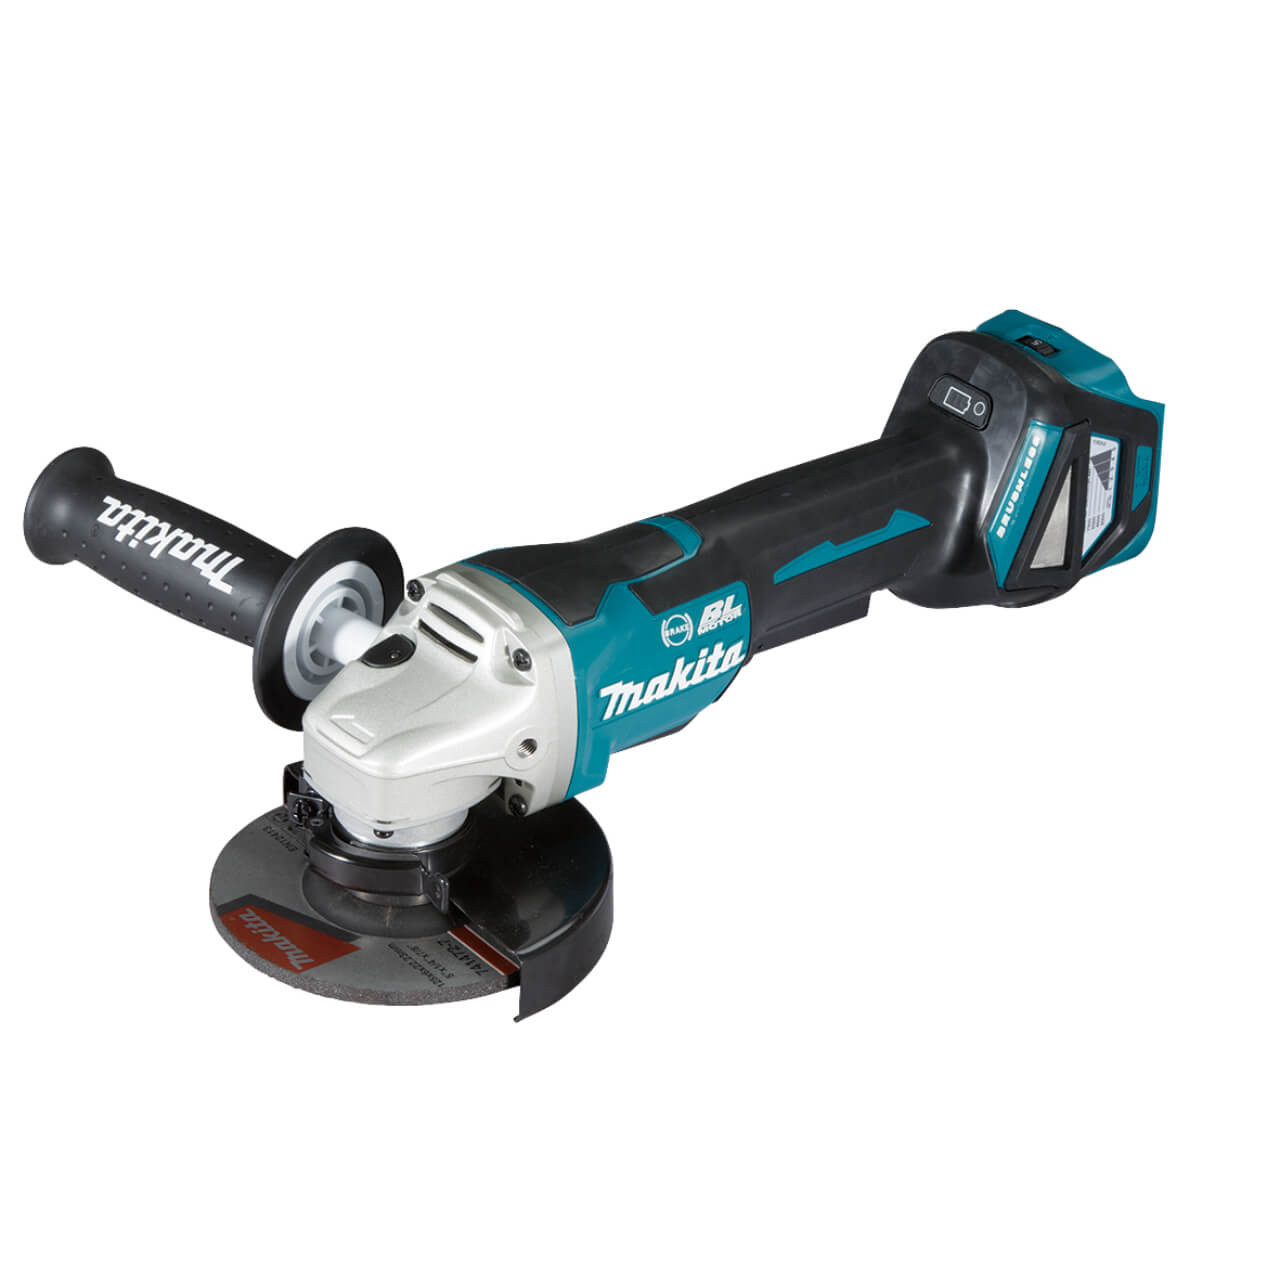 Makita 18V BRUSHLESS 125mm Variable Speed Paddle Switch Angle Grinder Kit - Includes 2 x 5.0Ah Batteries. Rapid Charger & Carry Case